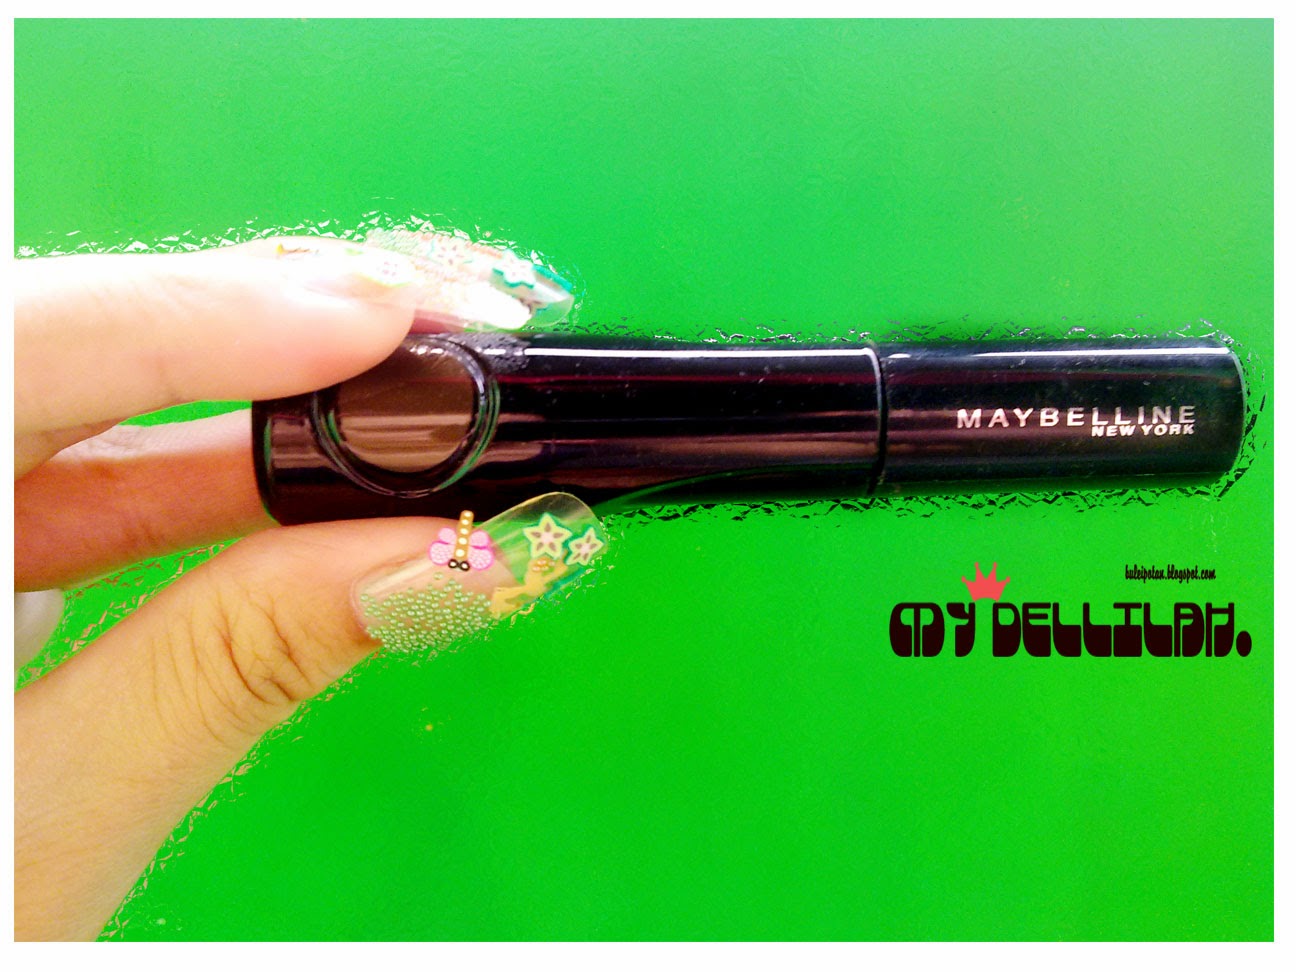 Fashion brow 24hr coloring mascara - Maybelline